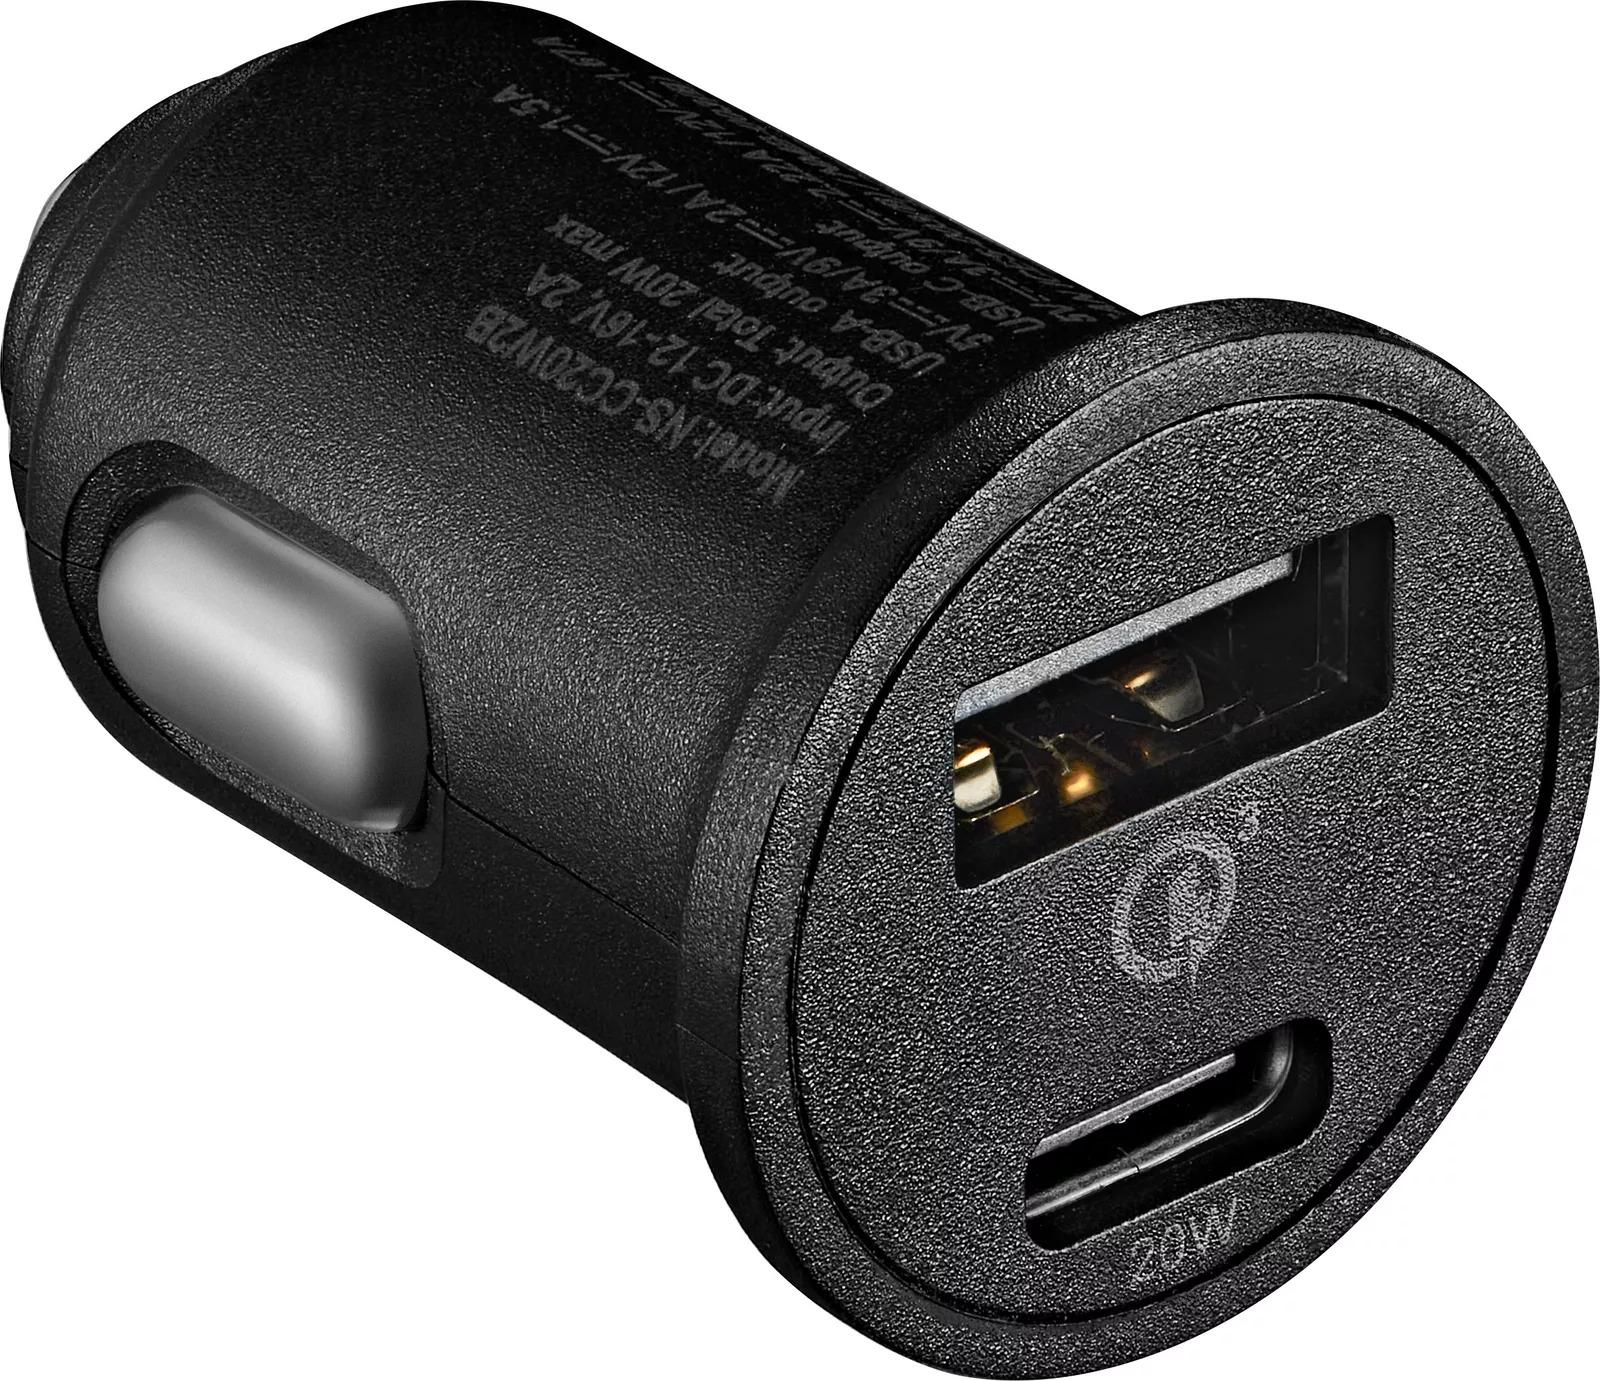 Insignia 20W Vehicle Charger with USB-C and USB-A Ports for $6.49 Shipped